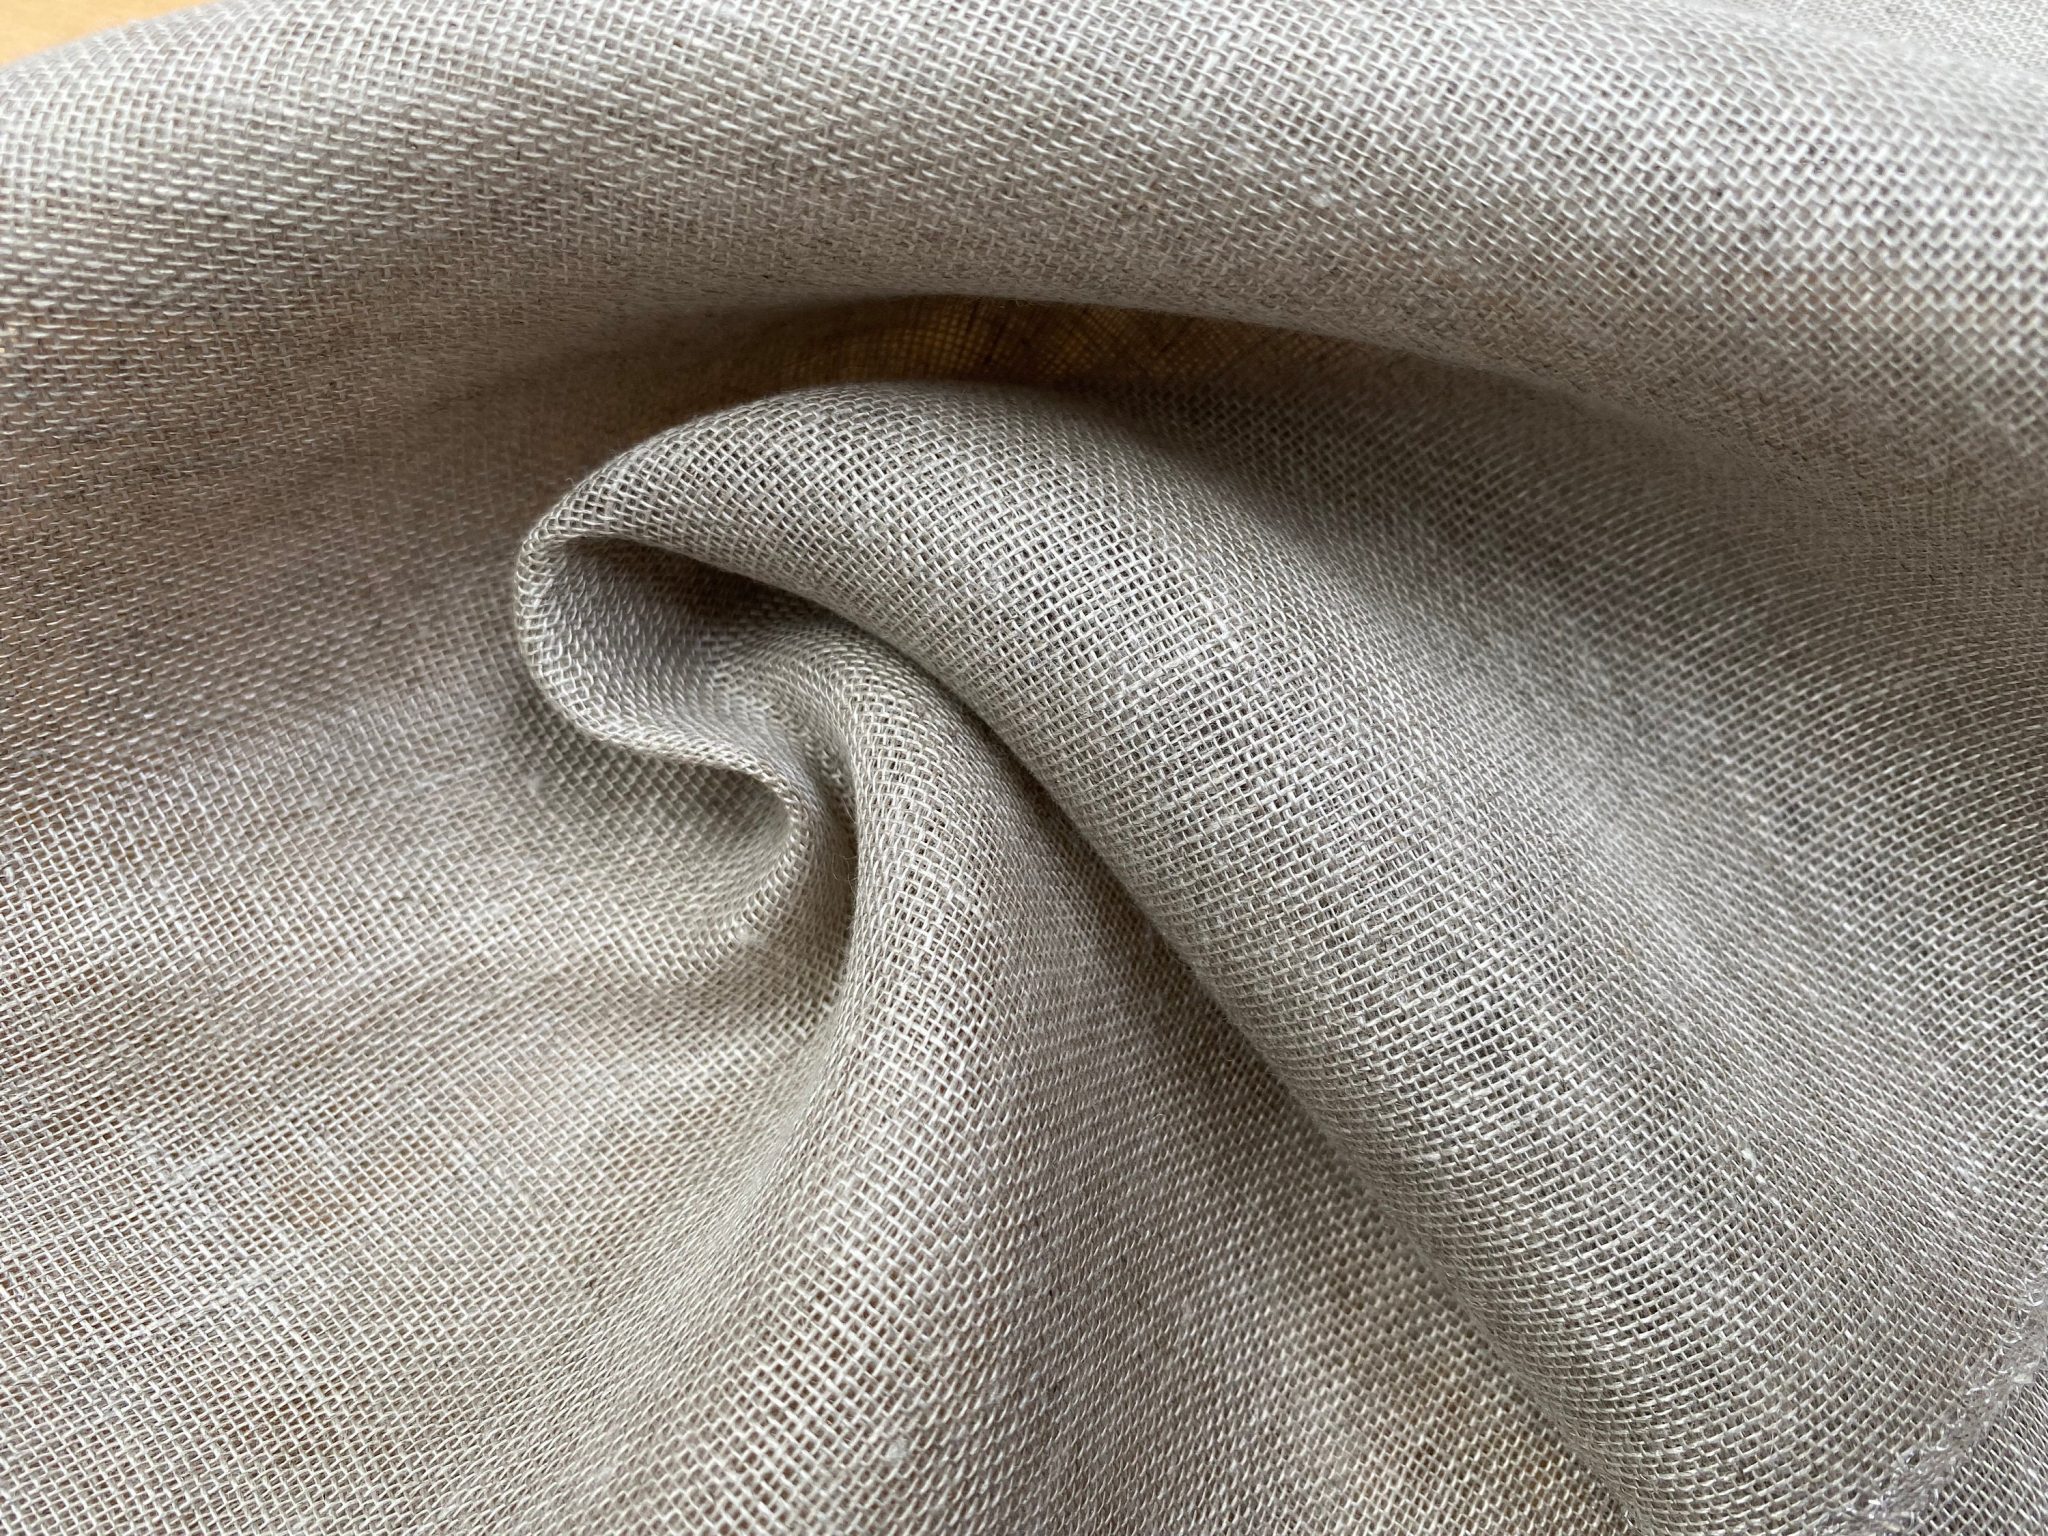 Extra Wide 100% Linen Fabric - Soft Linen Material for Home Decor ...